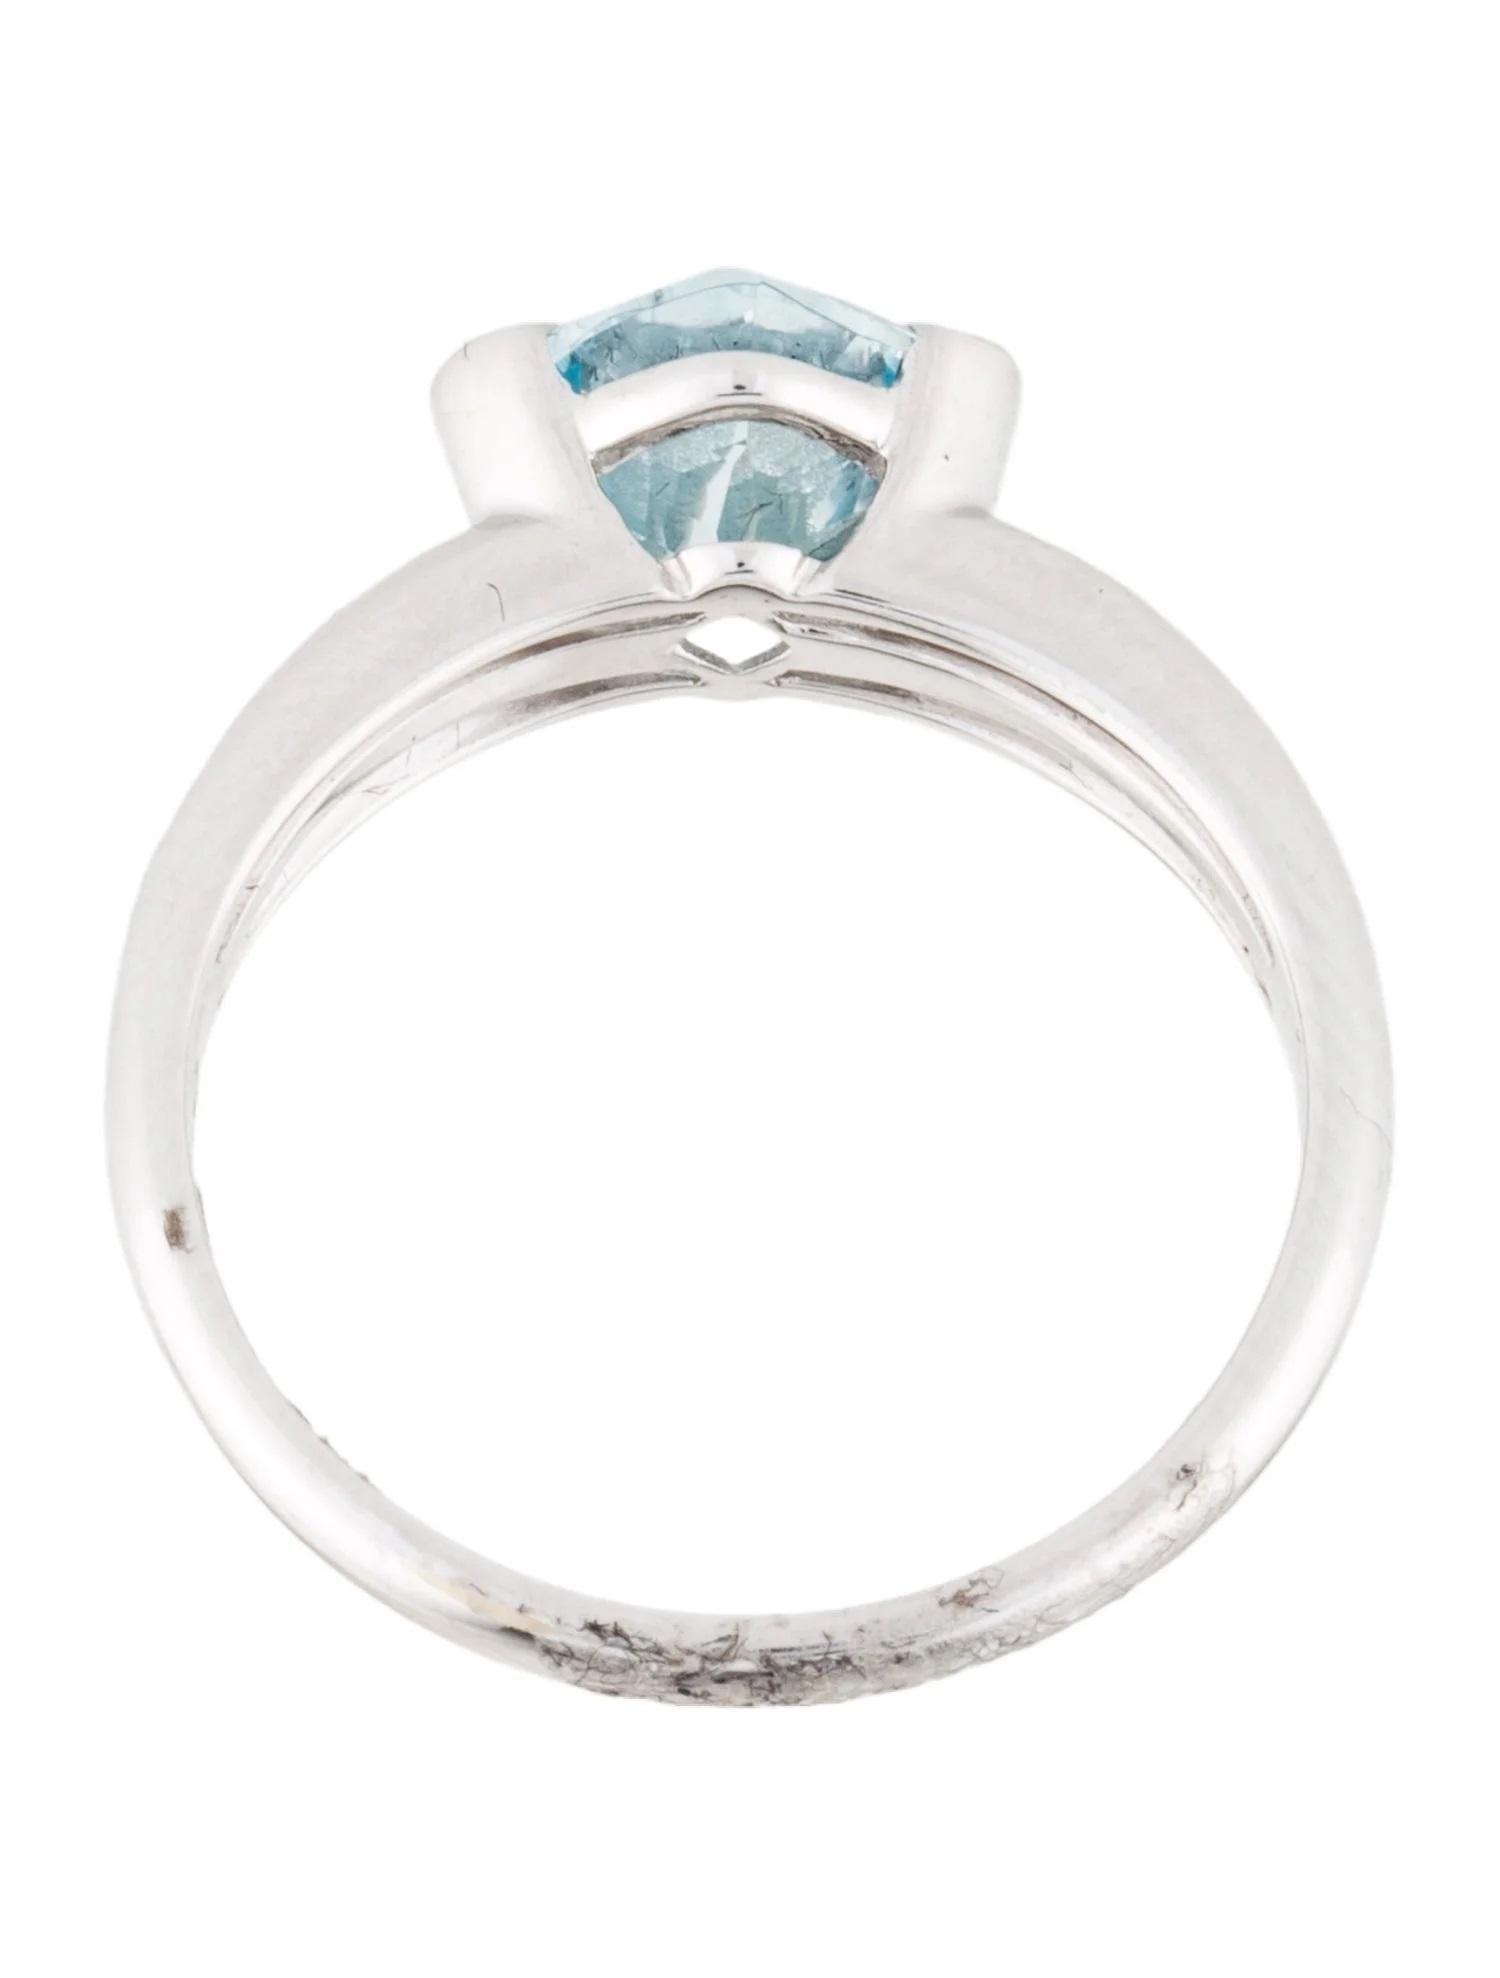 14K Aquamarine & Diamond Ring  Cushion Aquamarine  Rhodium-Plated White Gold In New Condition For Sale In Holtsville, NY